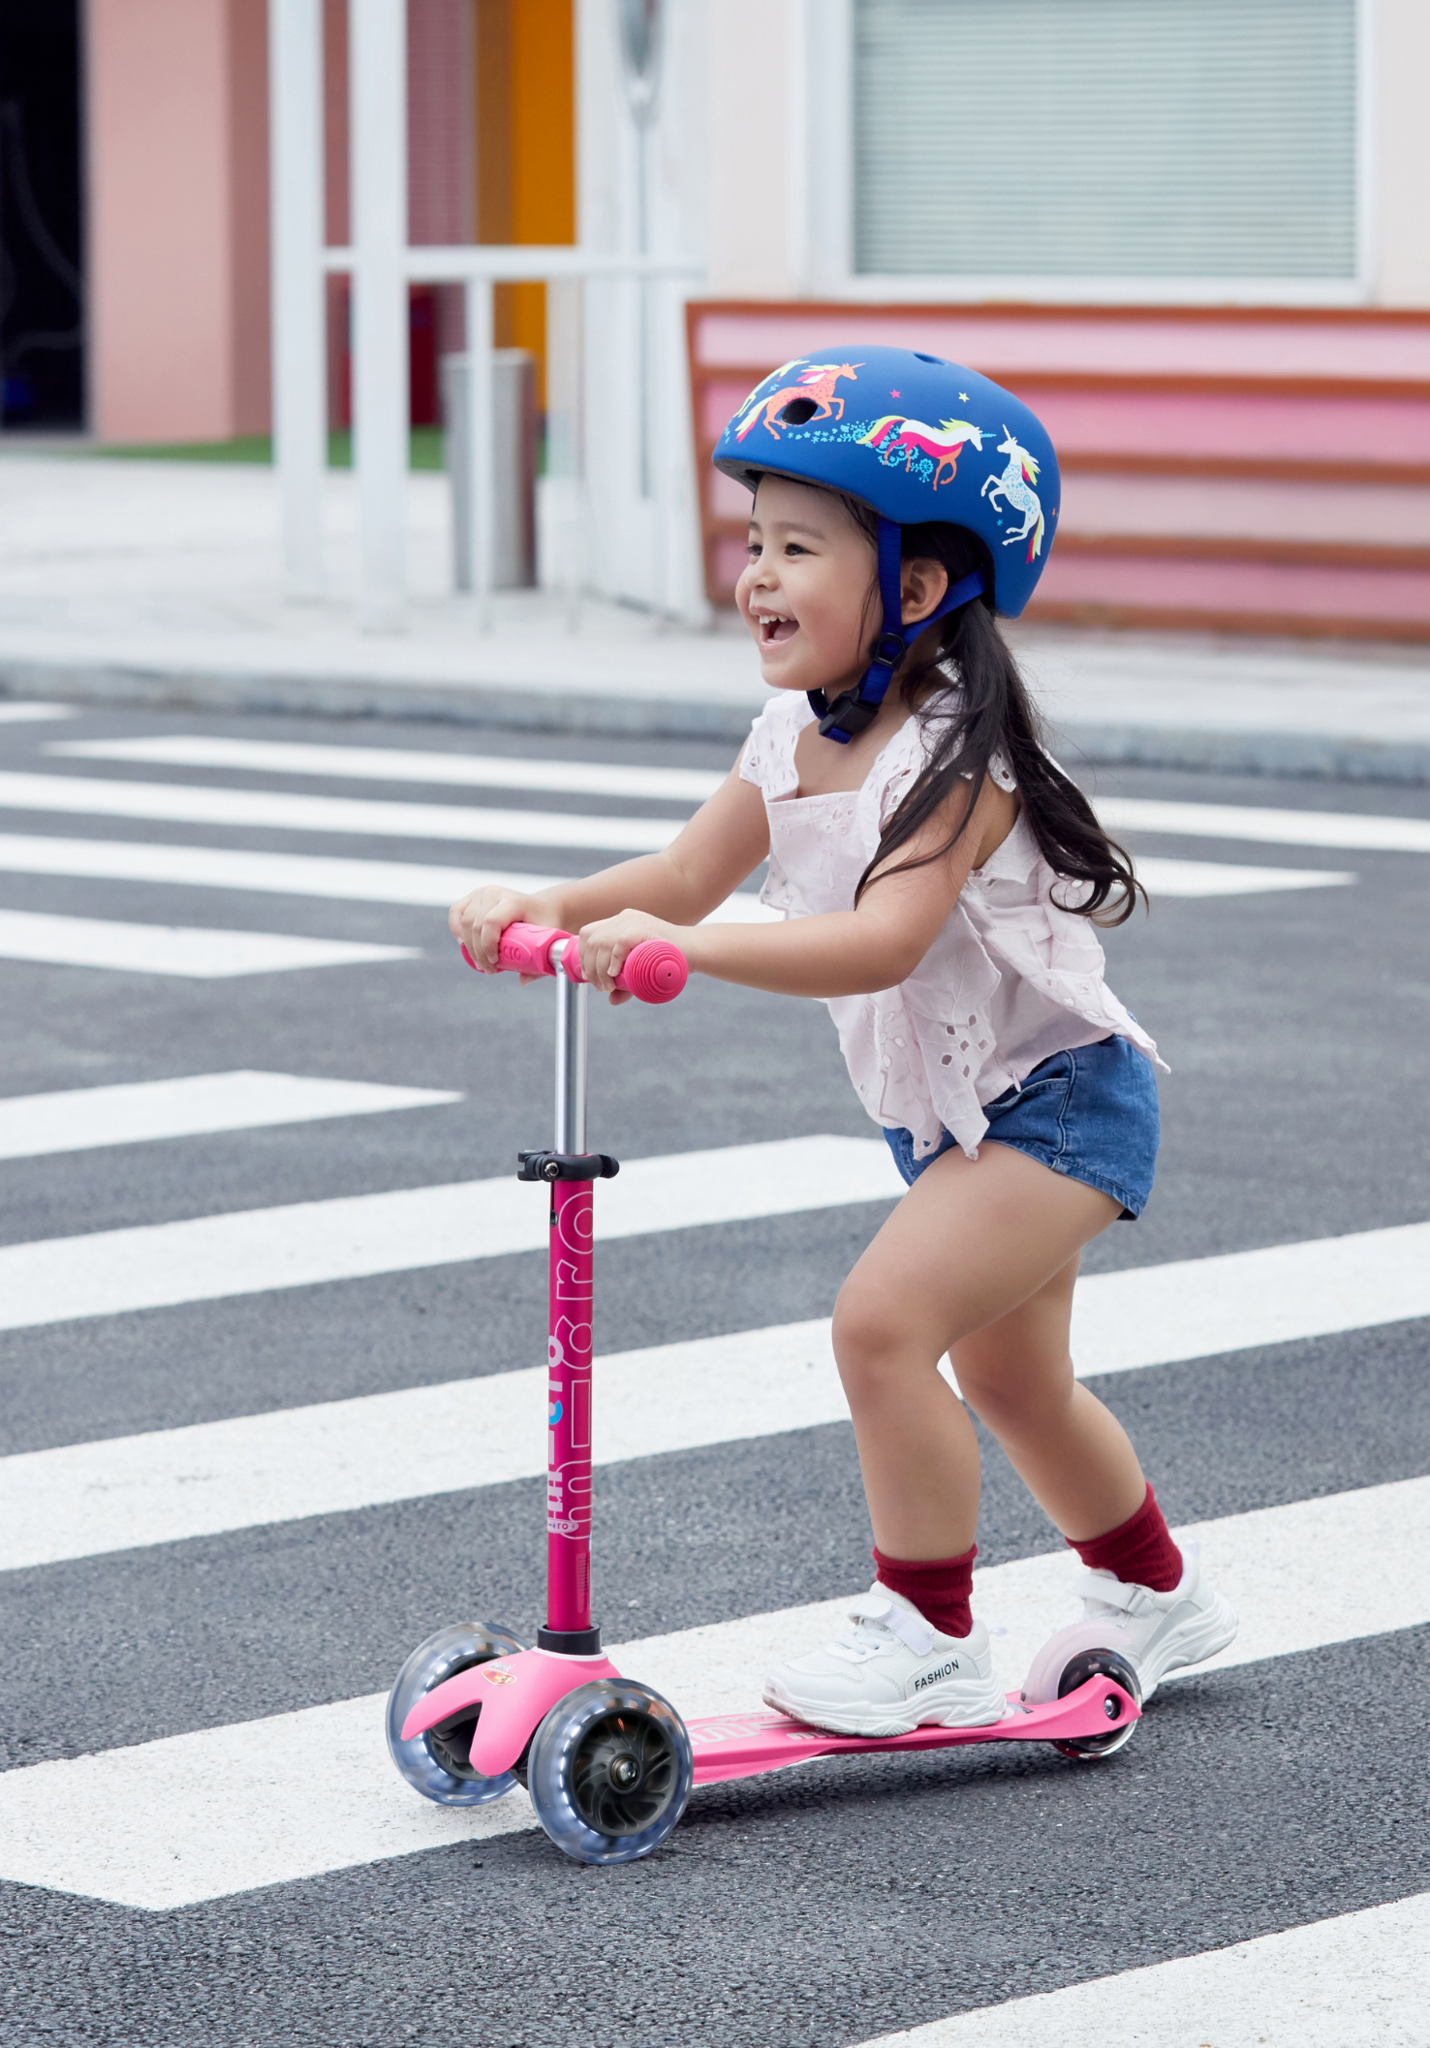 Micro Mini Deluxe Scooter with LED Wheels - Pink - Laadlee